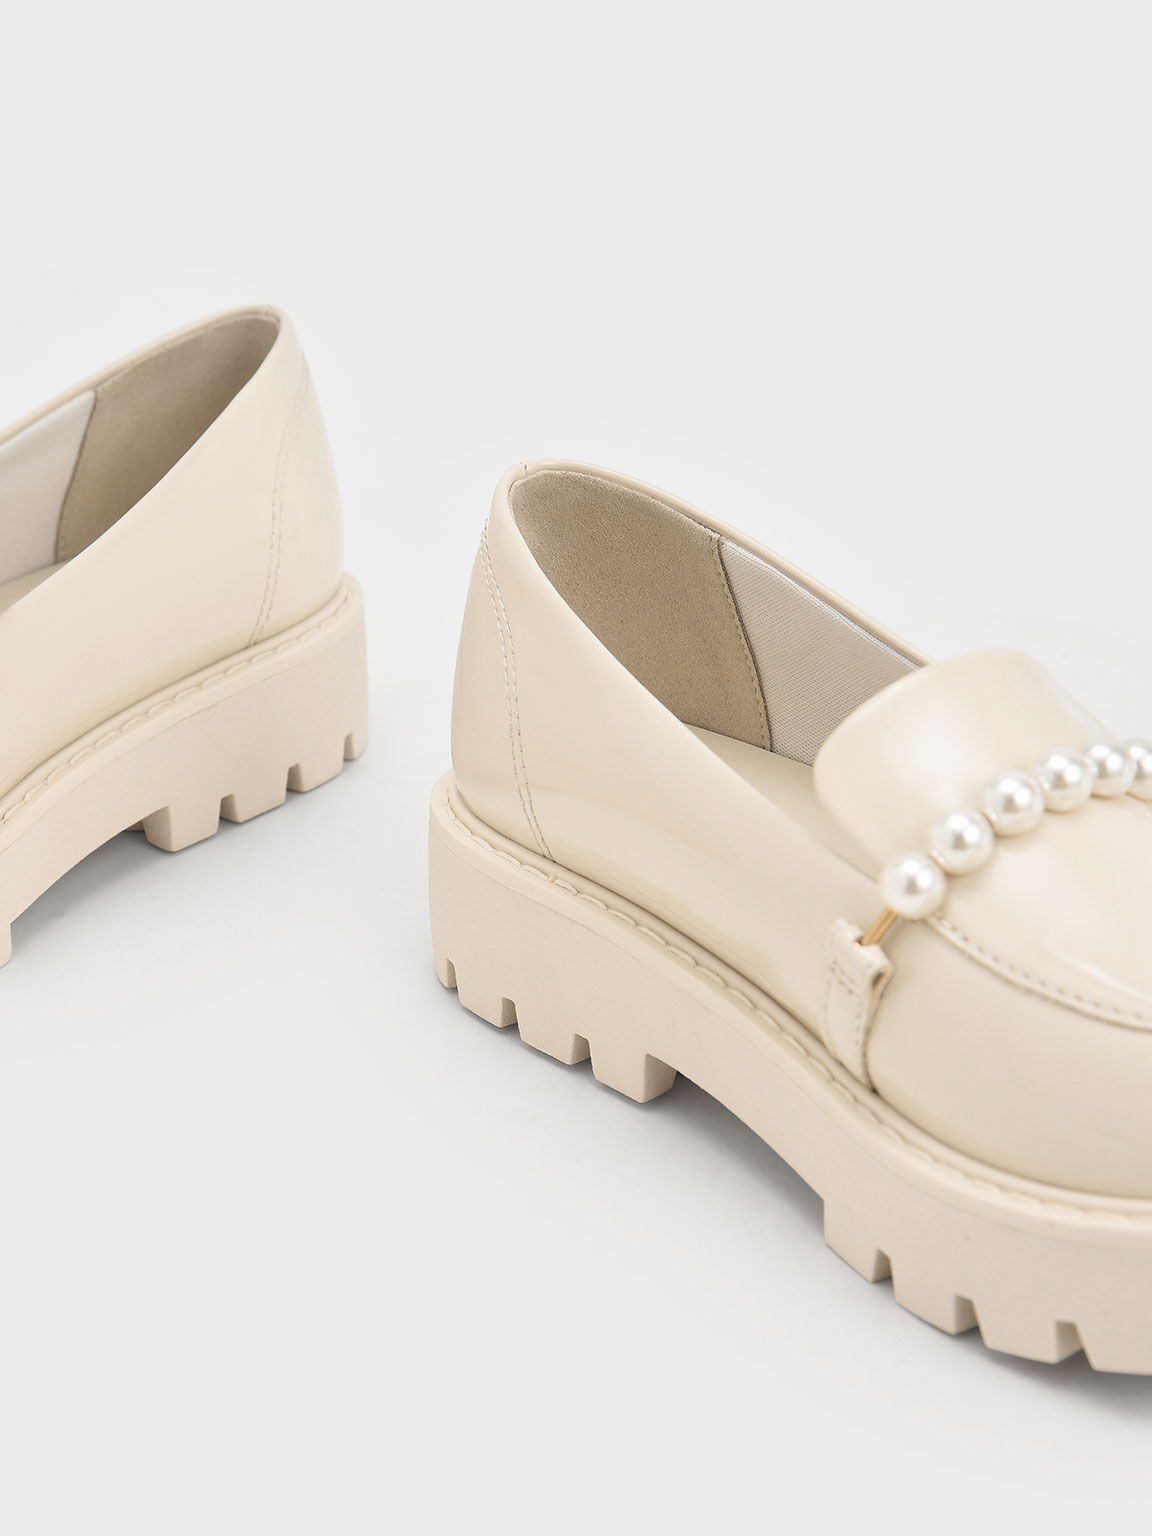 Girls' Patent Pearl-Embellished Loafers, Cream, hi-res